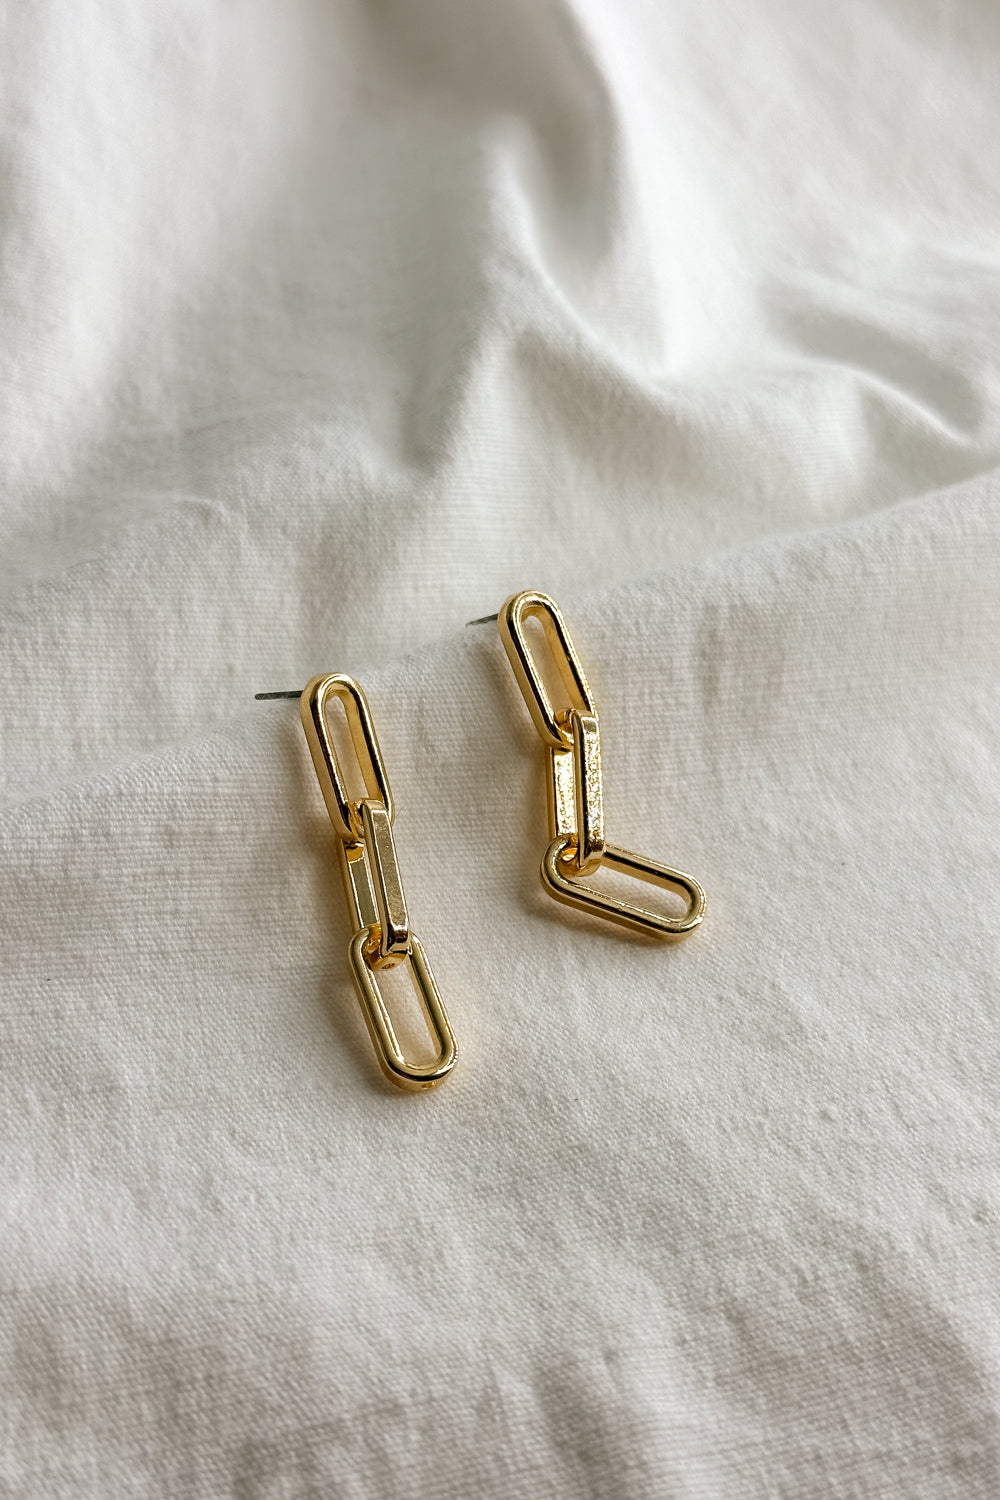 Flat lay view of the Emma Gold Chain Dangle Earring which features gold chain link dangle earrings